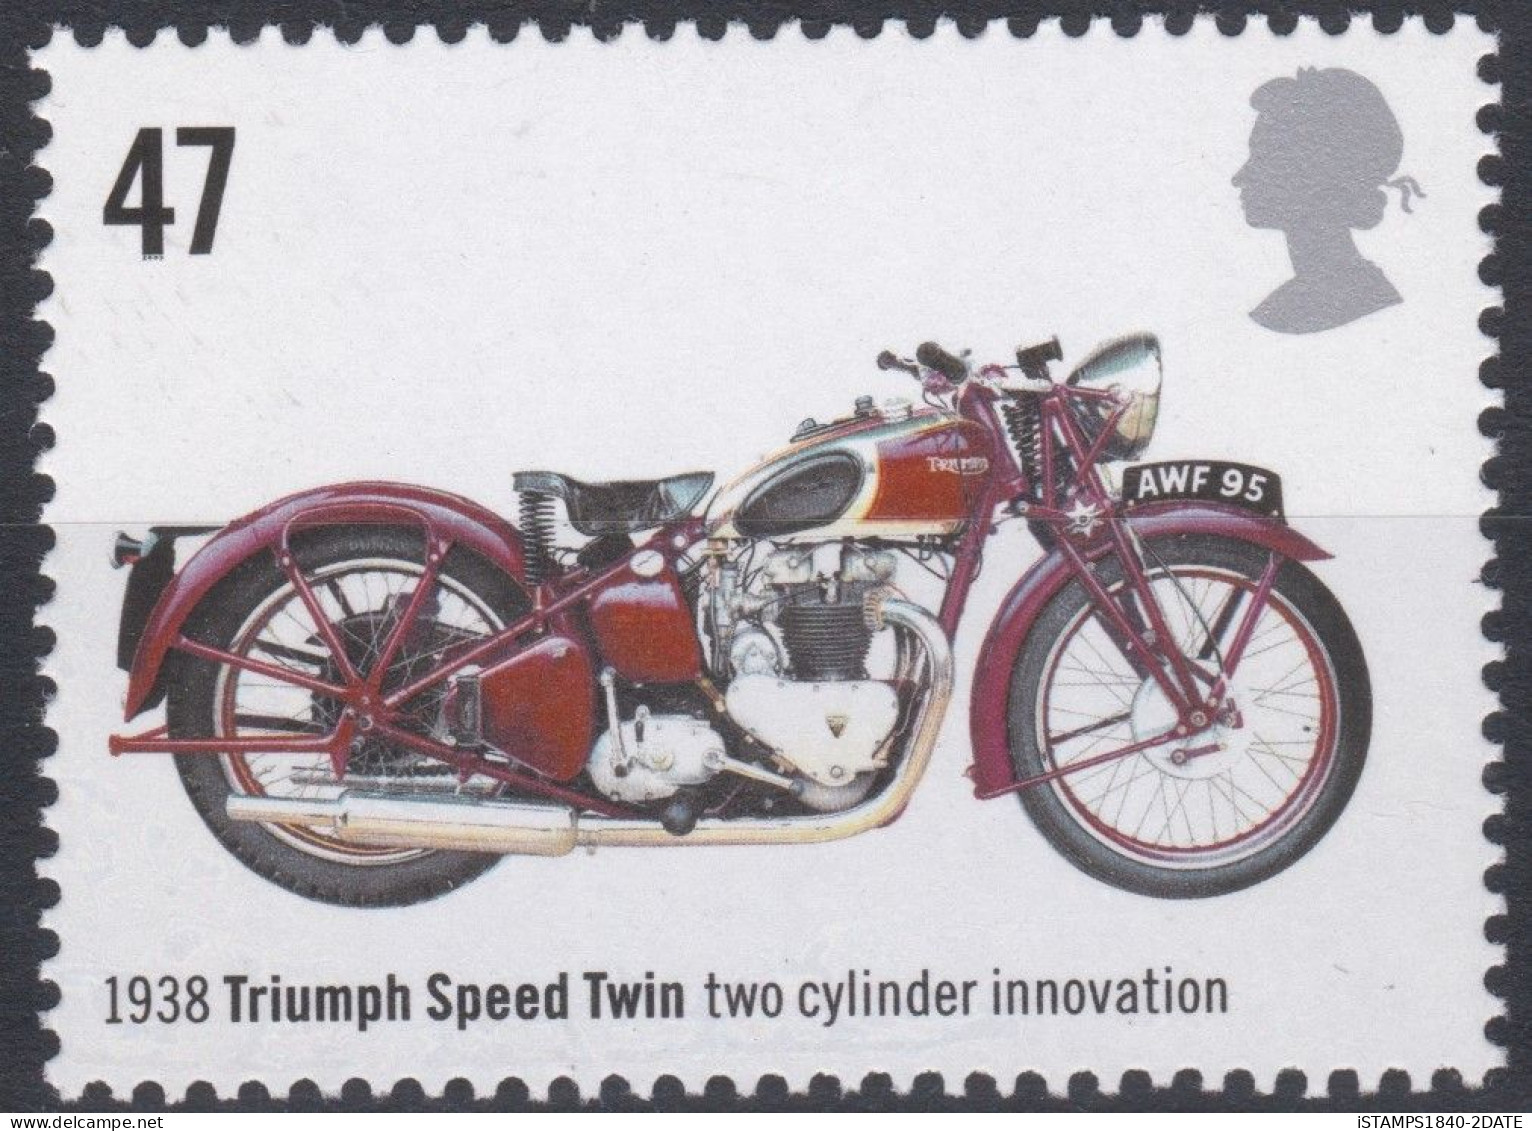 00863/Great Britain 2005 Sg2551 47p Multicoloured MNH Triumph Speed Twin, Two Cylinder Innovation (1938) - Motorfietsen